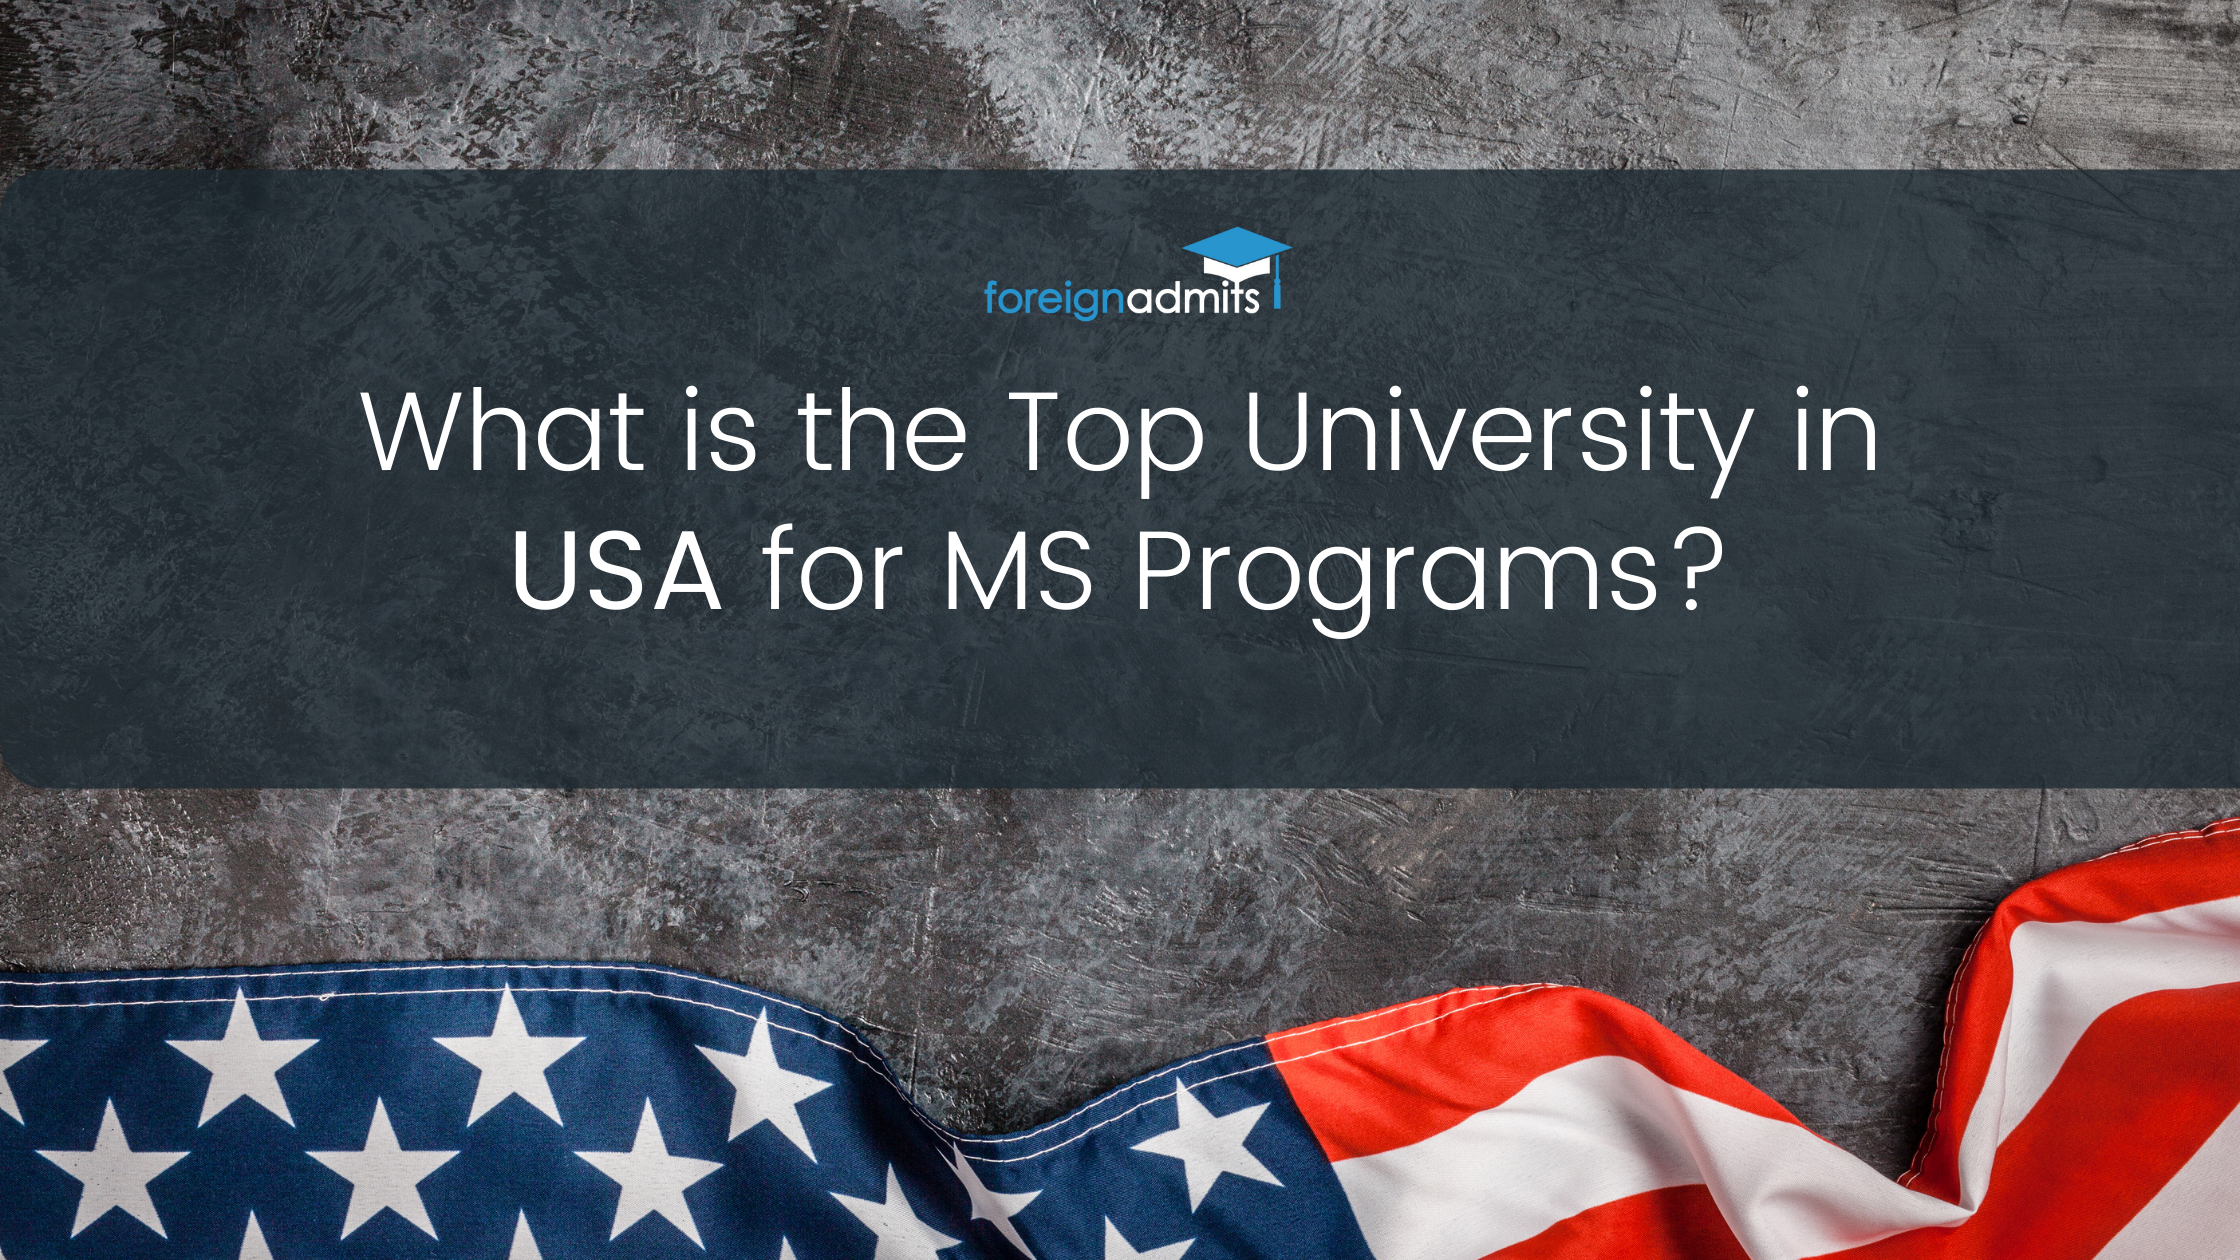 What are the Top University in USA for MS Programs?